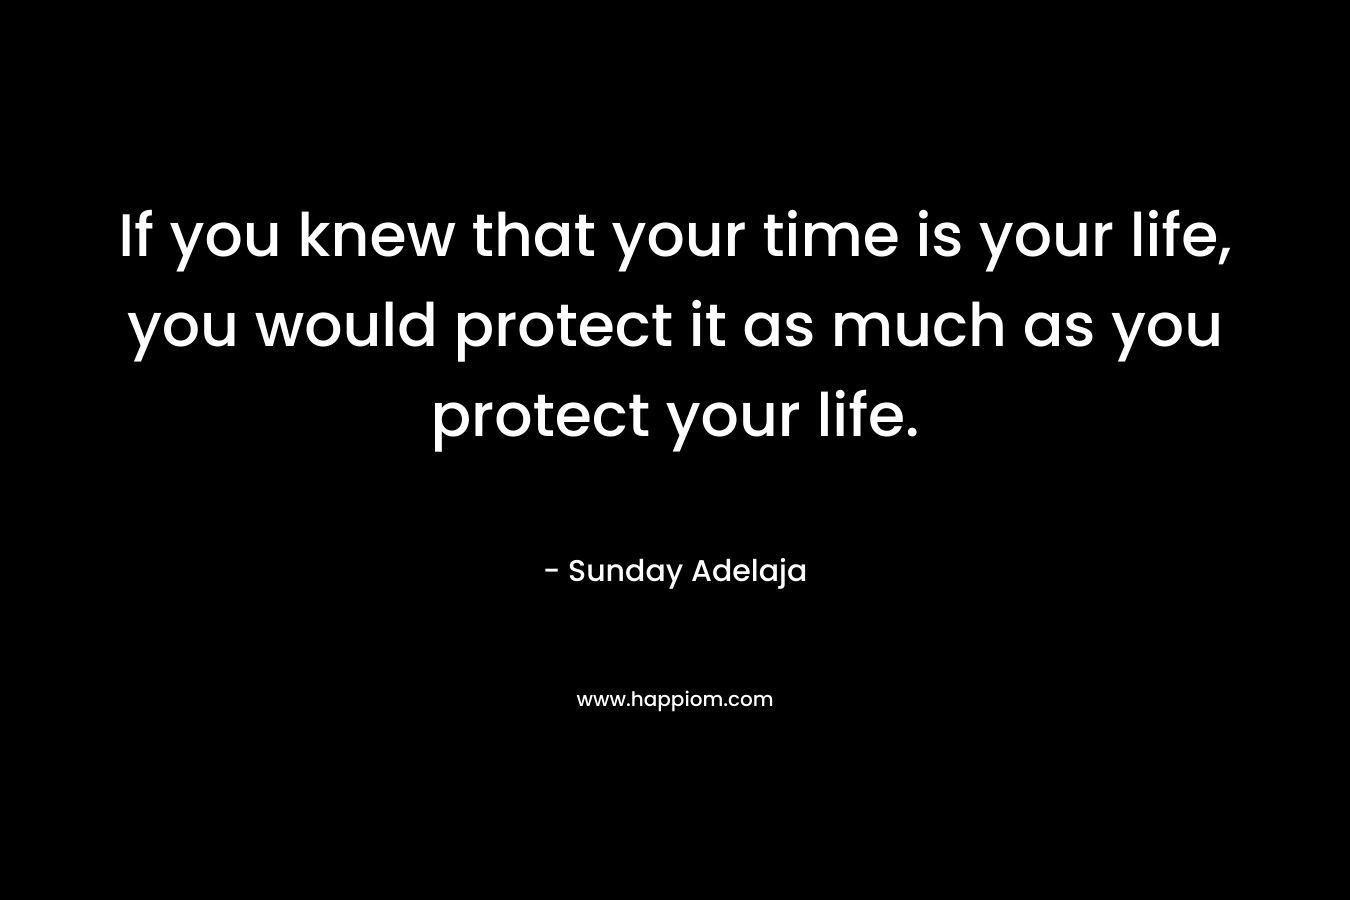 If you knew that your time is your life, you would protect it as much as you protect your life.